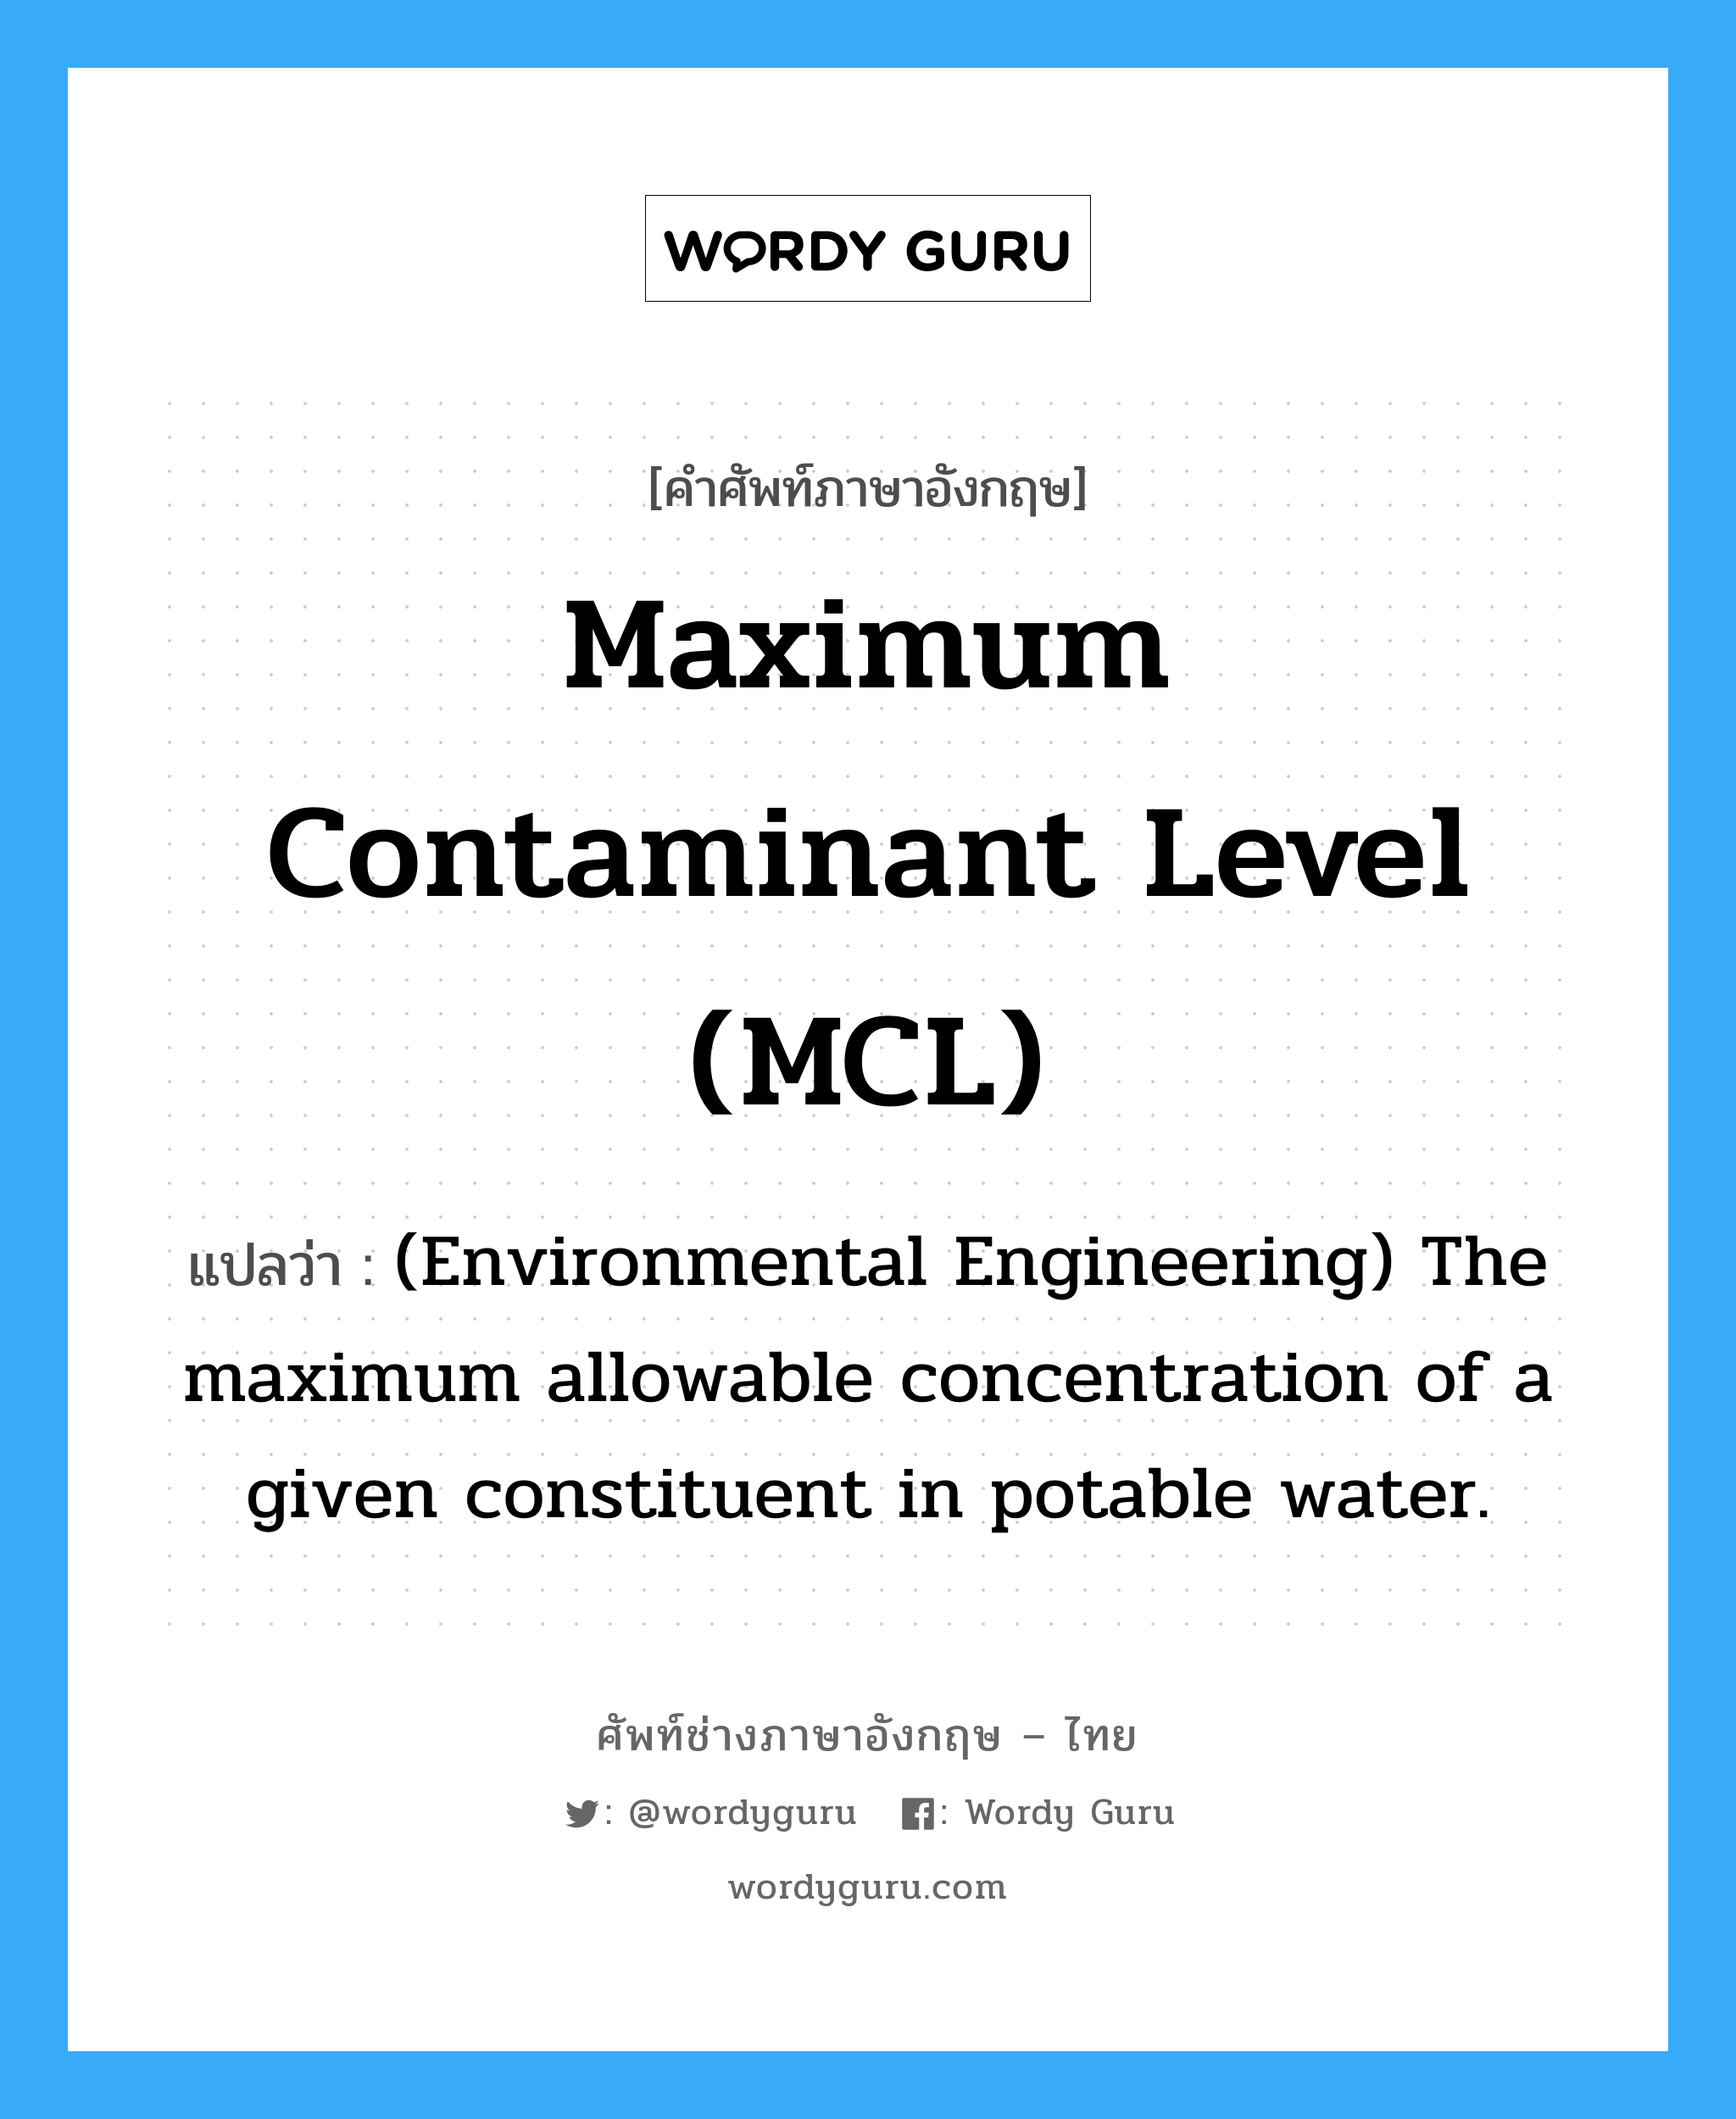 (Environmental Engineering) The maximum allowable concentration of a given constituent in potable water. ภาษาอังกฤษ?, คำศัพท์ช่างภาษาอังกฤษ - ไทย (Environmental Engineering) The maximum allowable concentration of a given constituent in potable water. คำศัพท์ภาษาอังกฤษ (Environmental Engineering) The maximum allowable concentration of a given constituent in potable water. แปลว่า Maximum contaminant level (MCL)